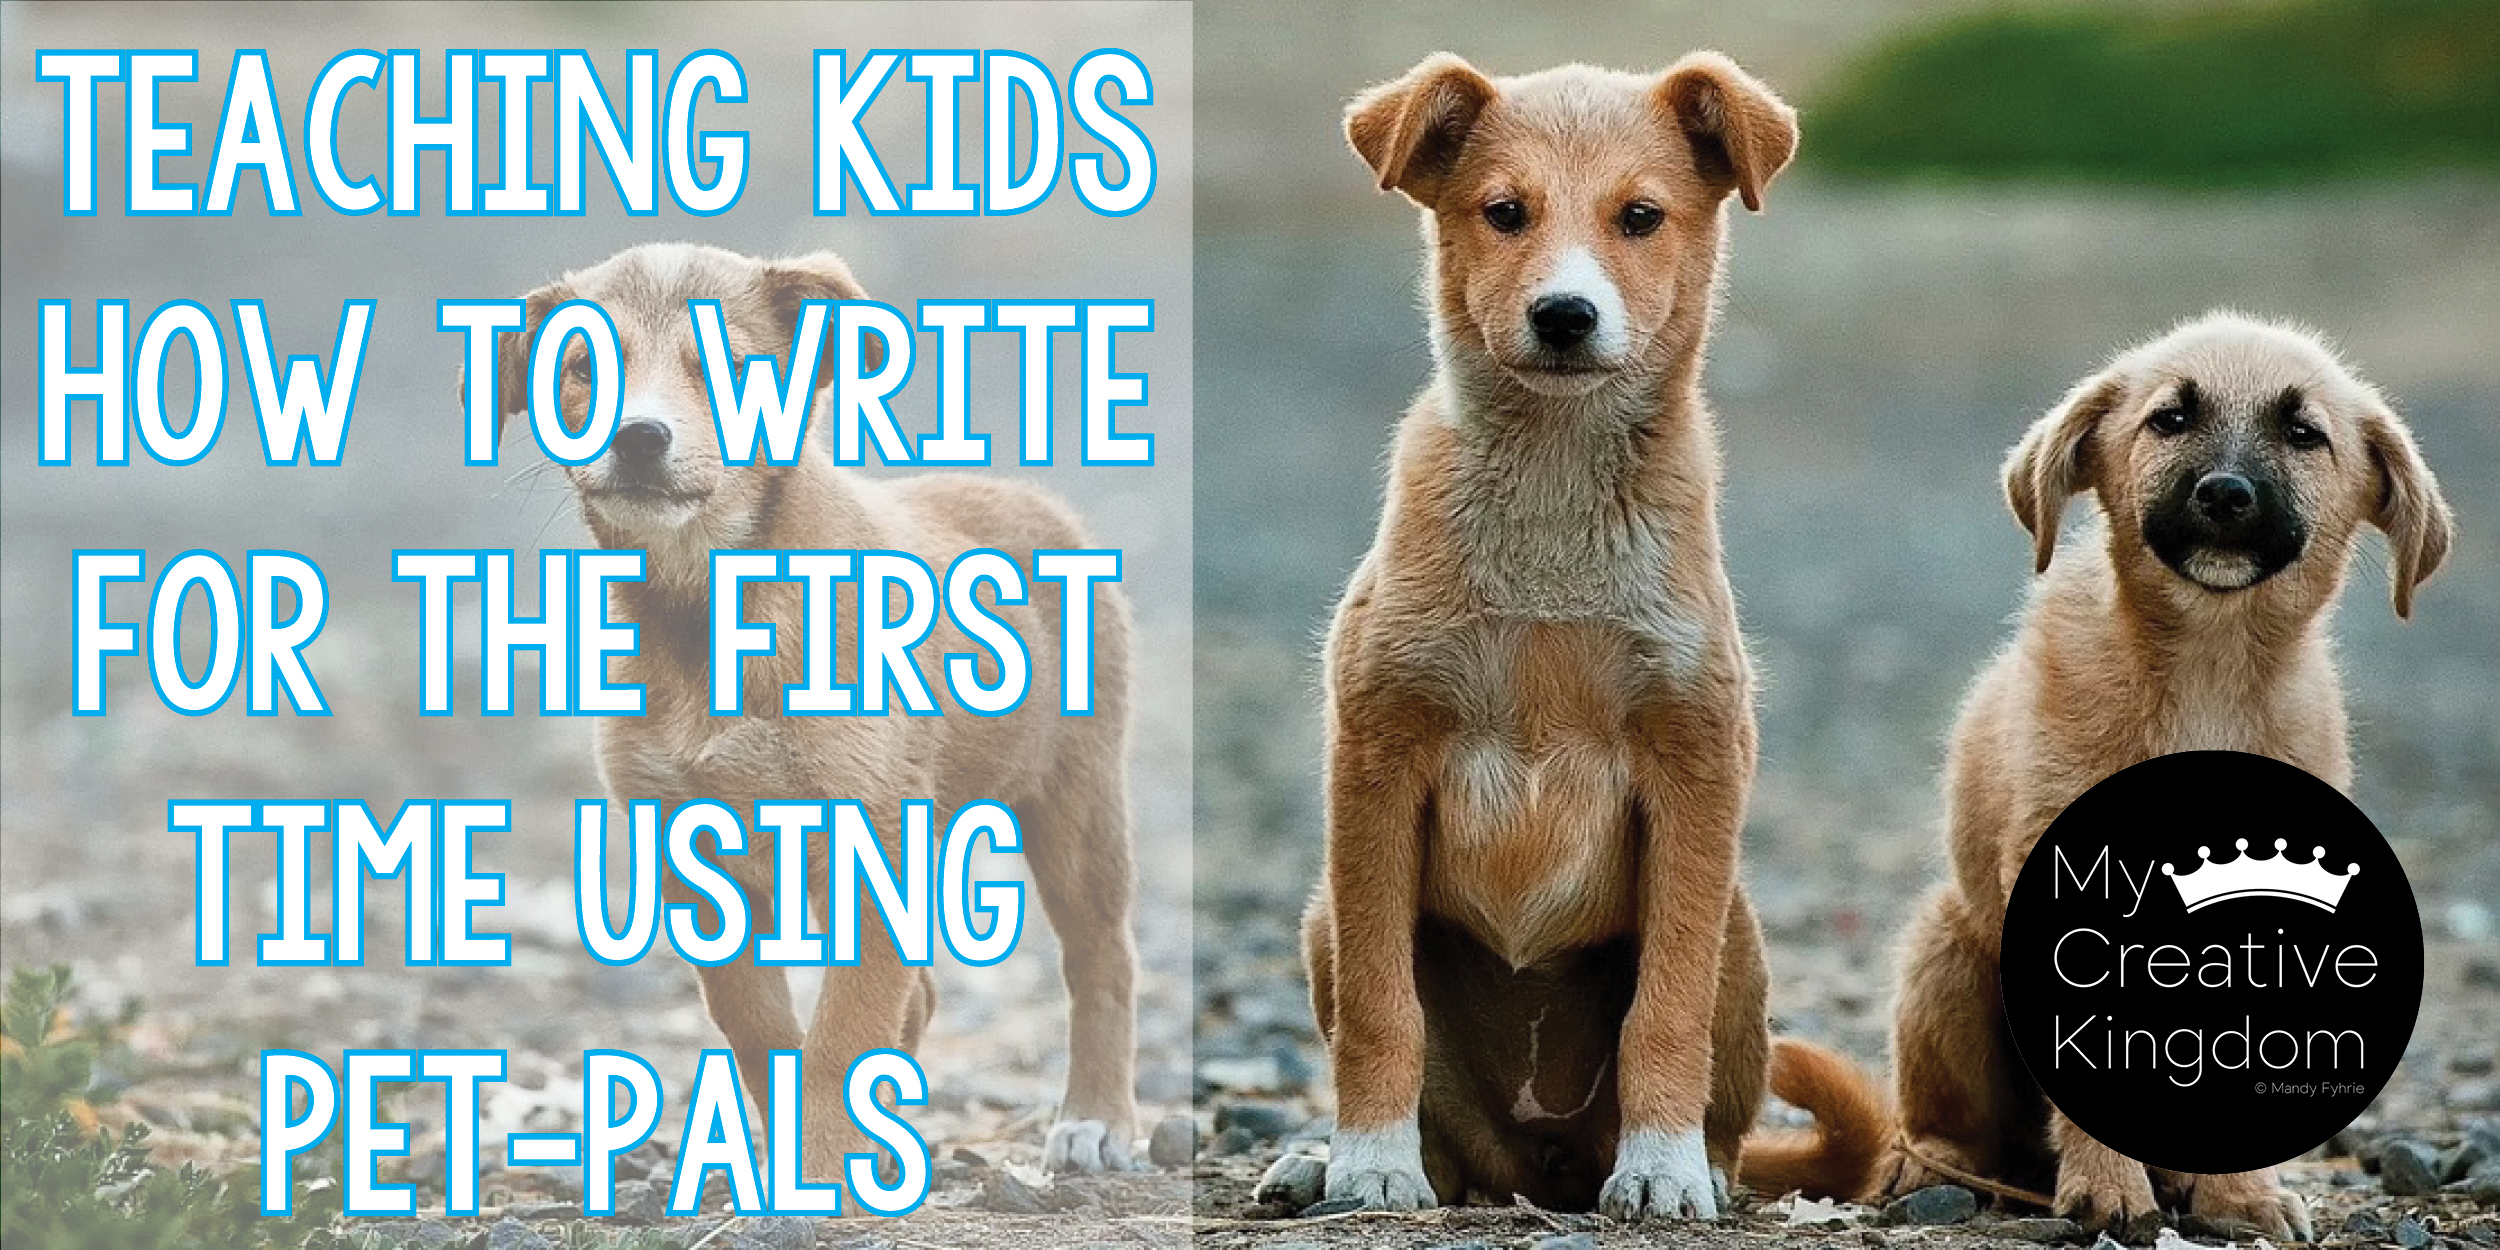 Teaching Kindergartners how to Write for the First time by using Pet-Pals